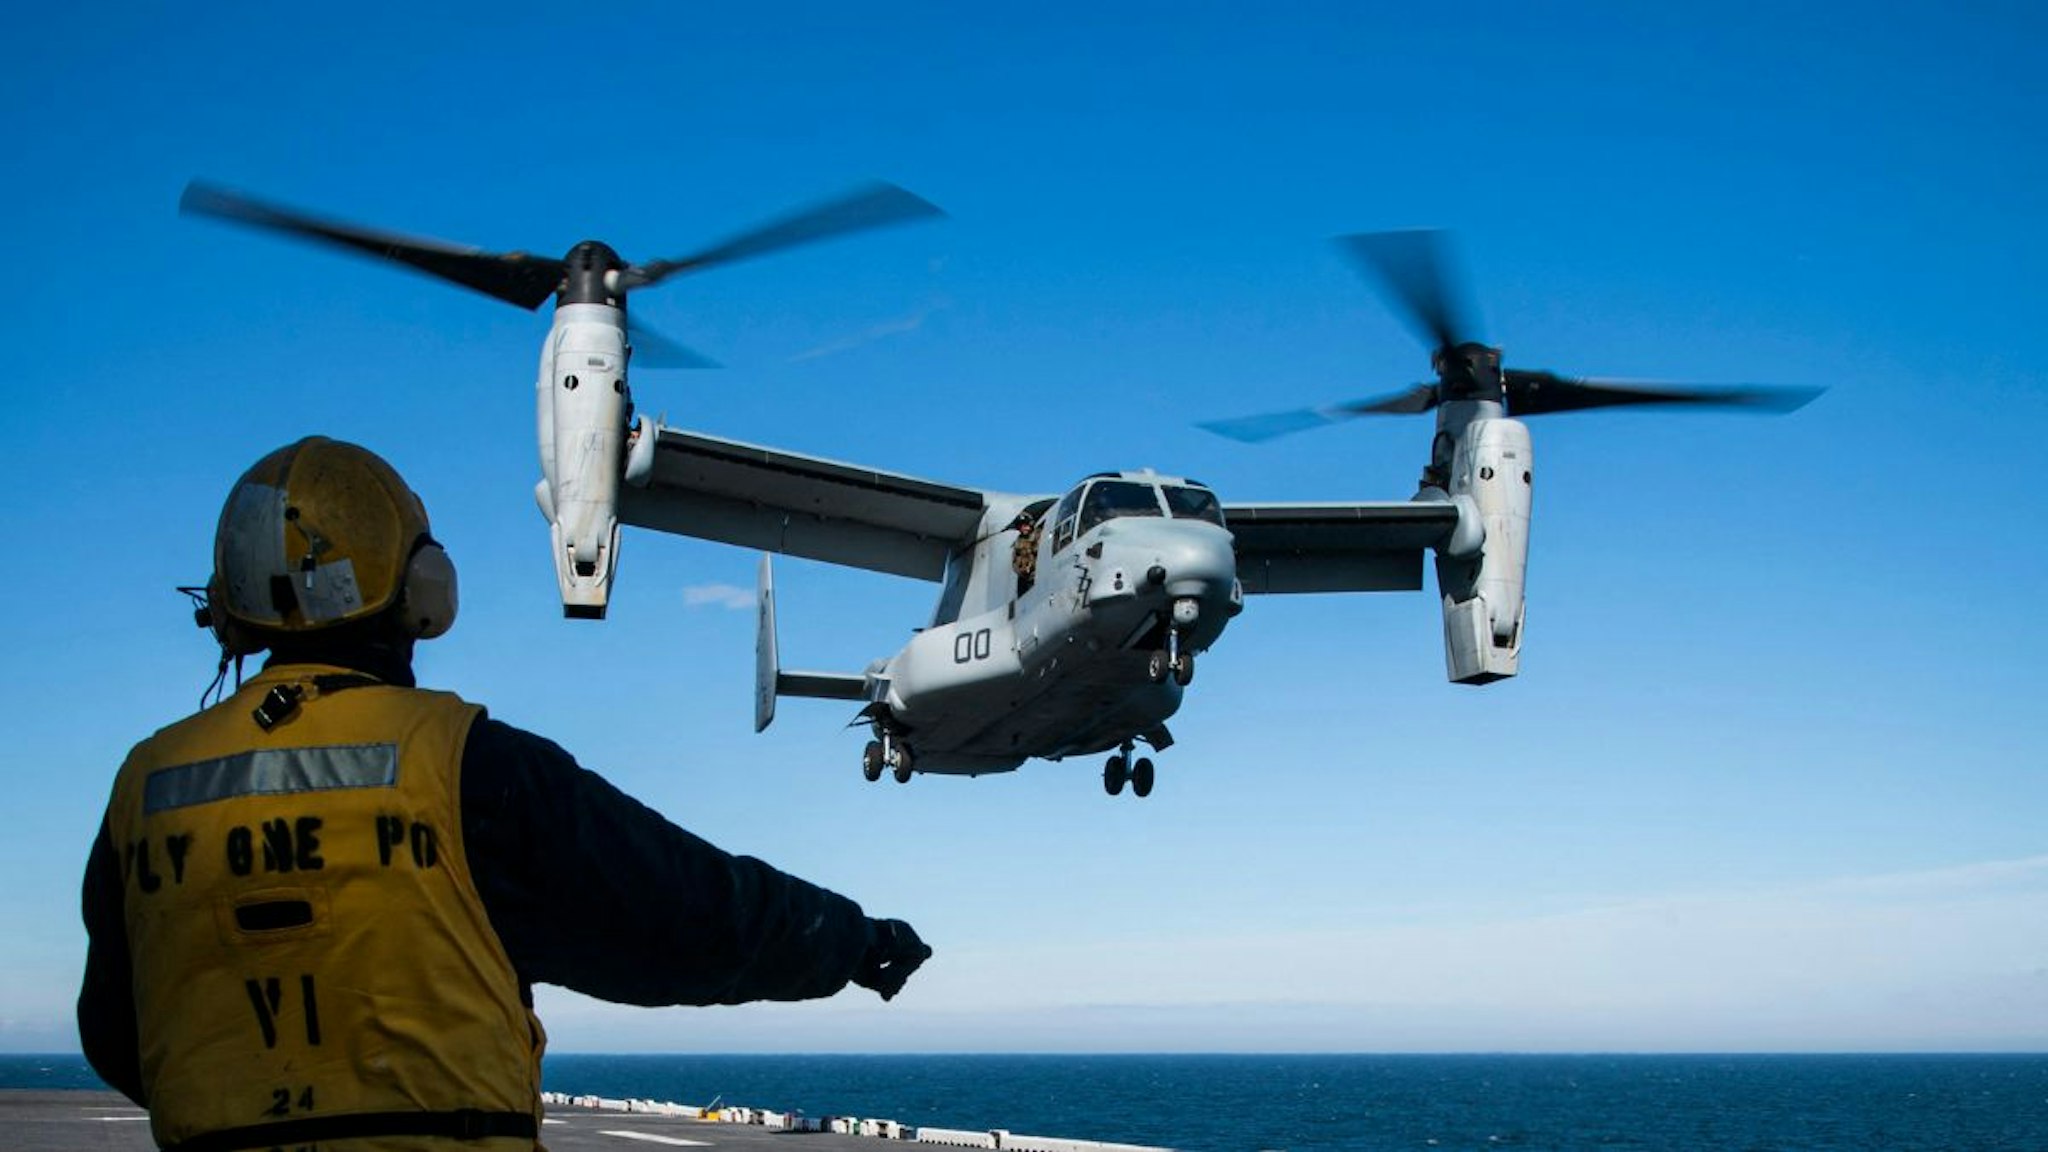 Aviation Boatswains Mate signals to the pilots of a MV-22 Osprey assault support aircraft, assigned to the 22nd Marine Expeditionary Unit, as it approaches to land on the flight deck of the Wasp-class amphibious assault ship USS Kearsarge (LHD 3) on June 8, 2022, during the BALTOPS 22 Exercise in the Baltic Sea.